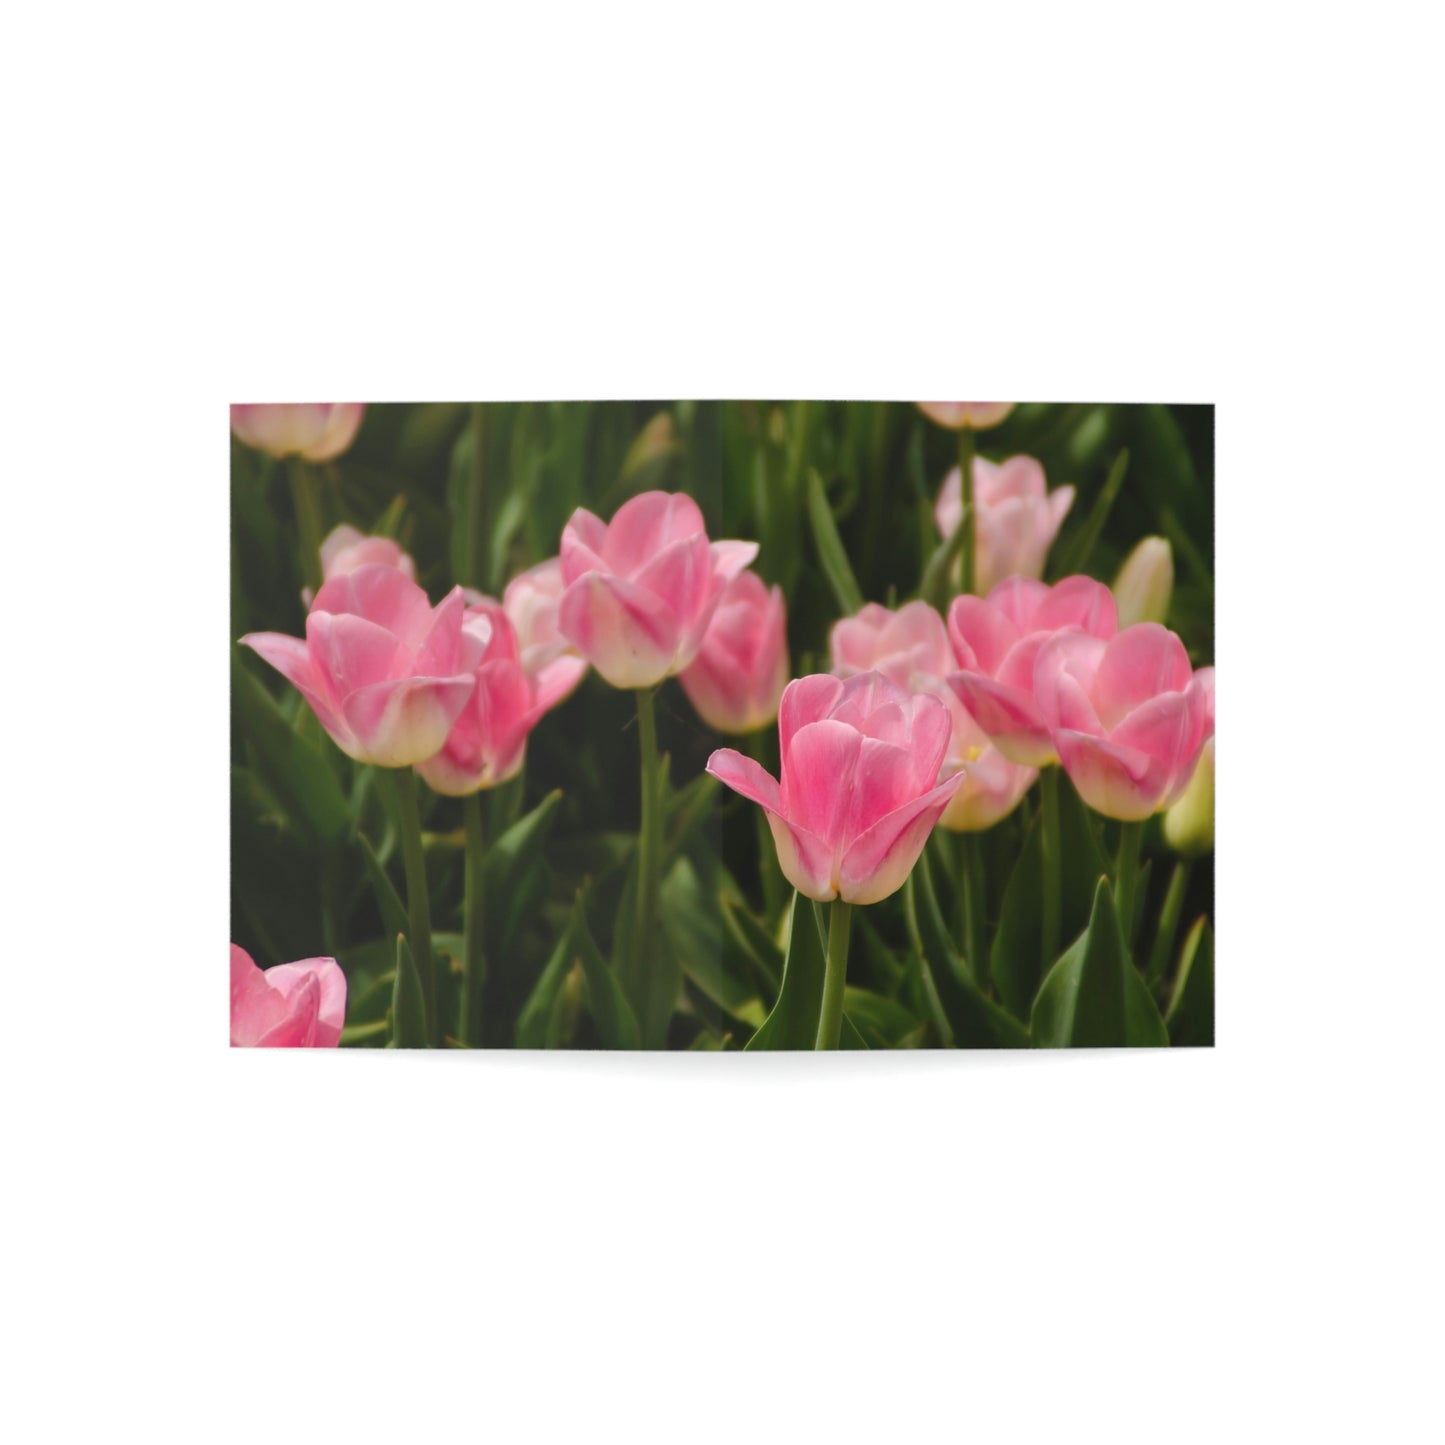 Flowers 17 Greeting Cards (1, 10, 30, and 50pcs)